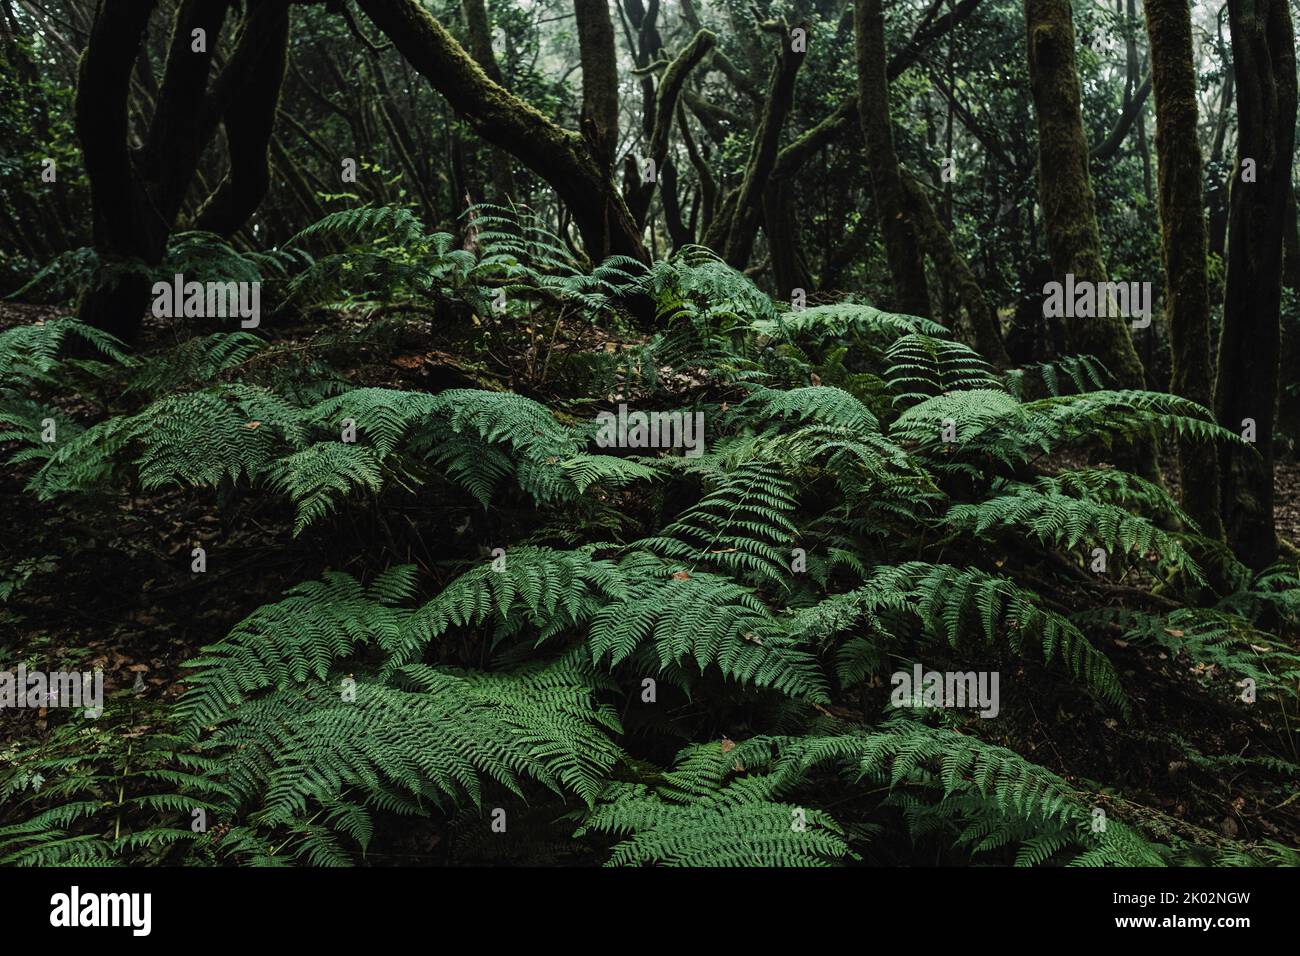 Close up of big leaves in the green woods and forest in background. Nature outdoors wild scenic place. Dark and shadow landscape. Concept of environment and planet earth. Stop deforestation. Creepy mist atmosphere Stock Photo